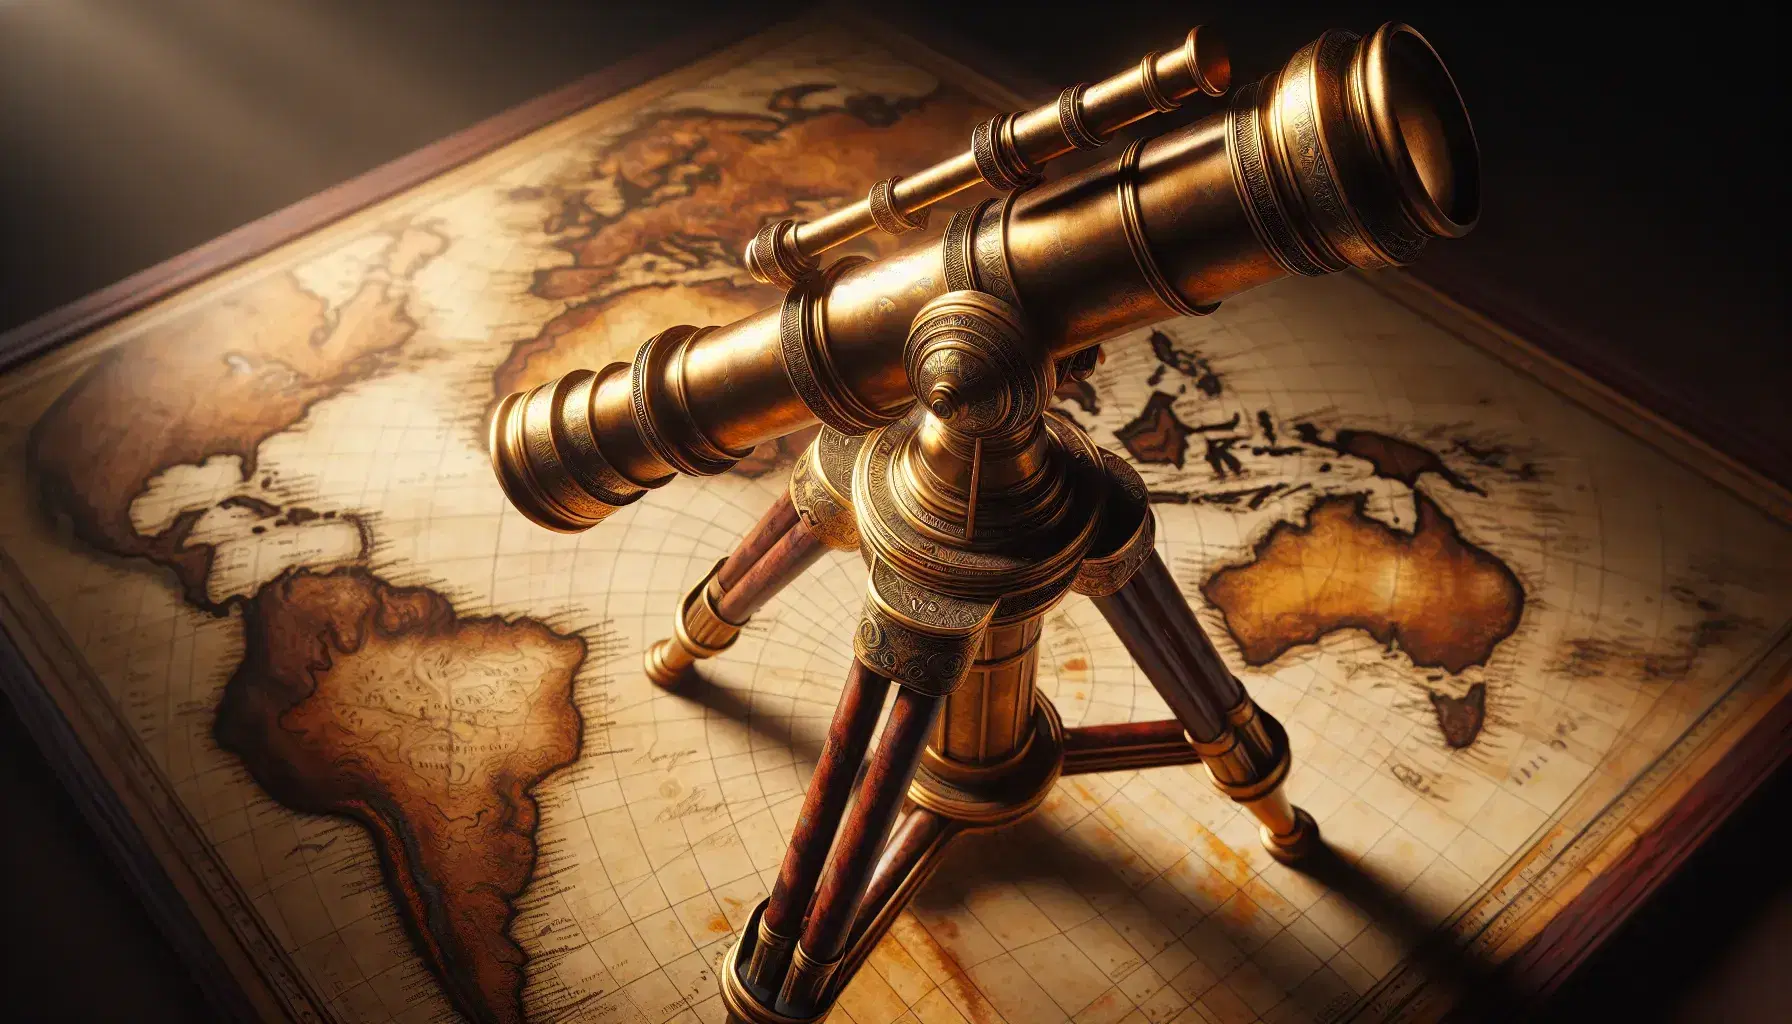 Vintage brass telescope on carved wooden tripod over antique world map, showing patina and signs of age, with soft lighting highlighting textures.